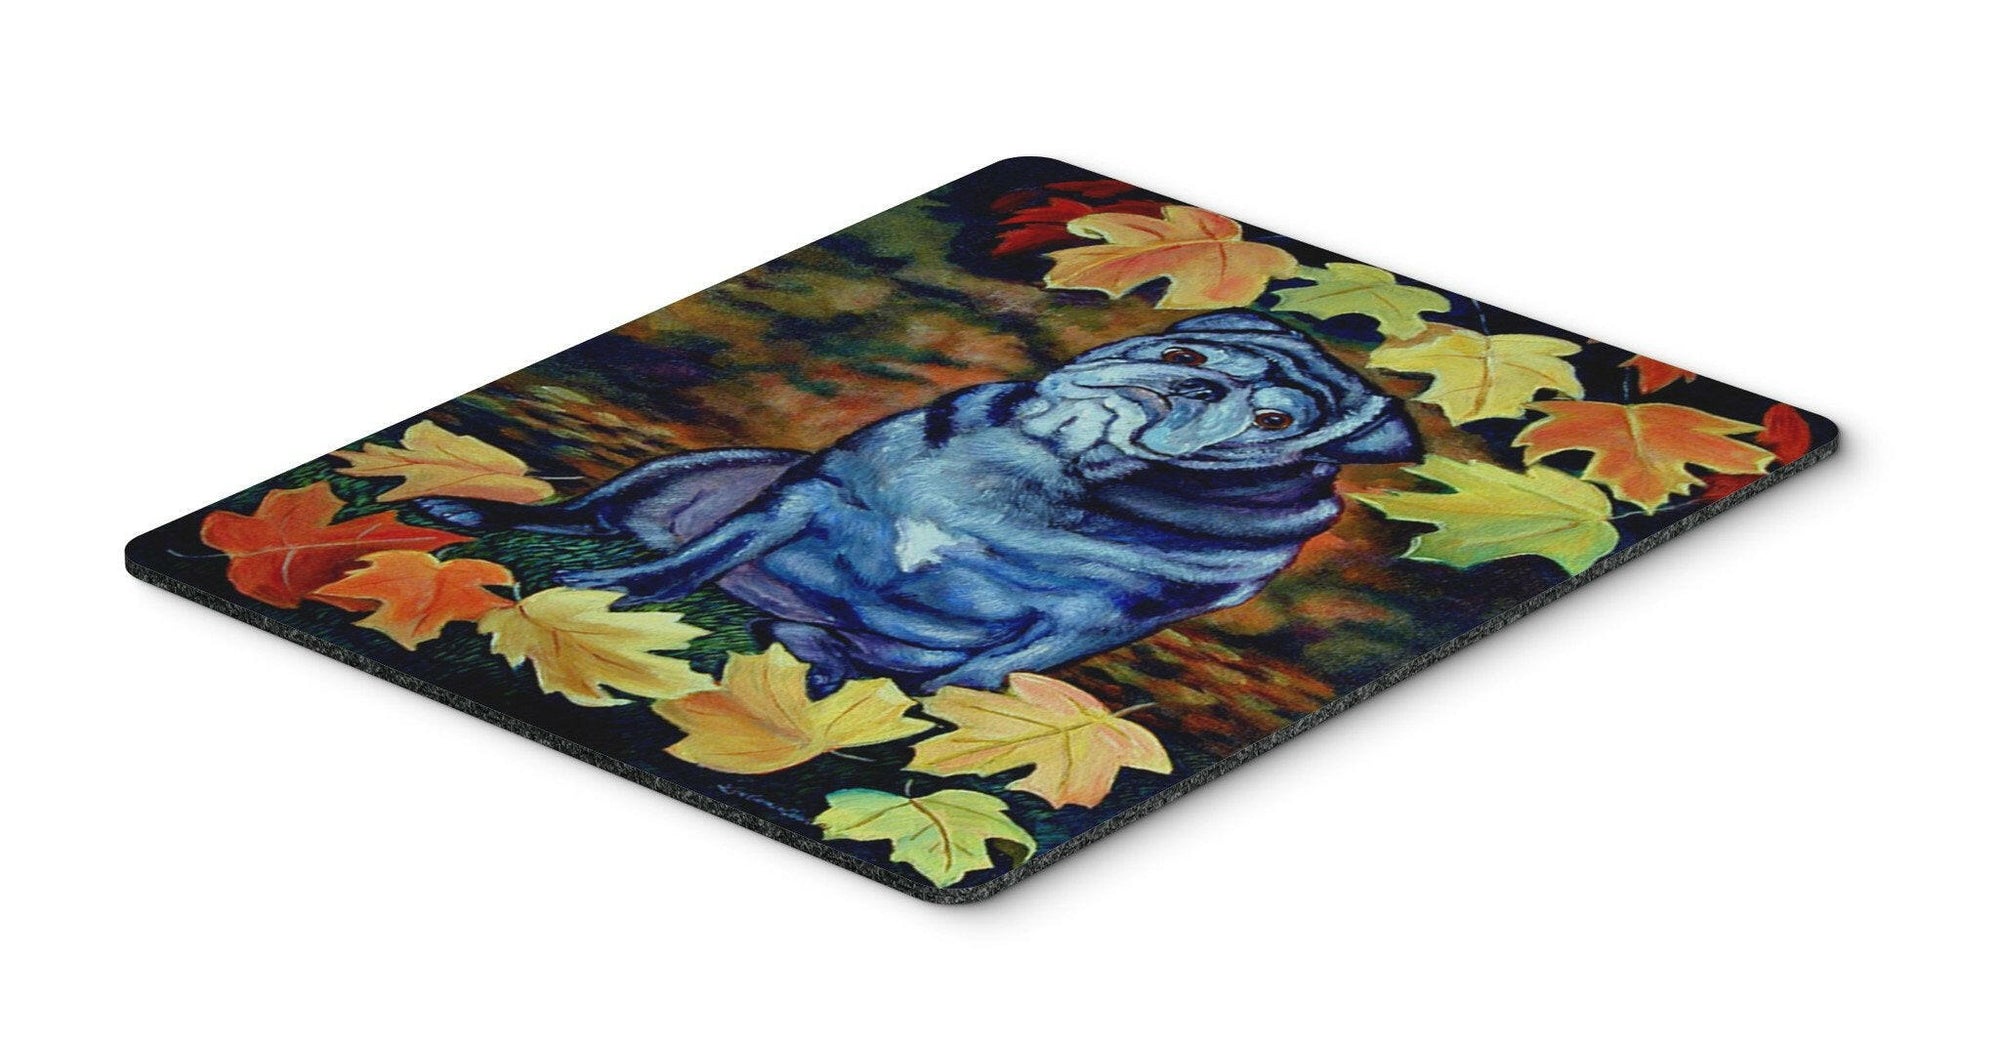 Old Black Pug in fall leaves Mouse Pad / Hot Pad / Trivet by Caroline's Treasures